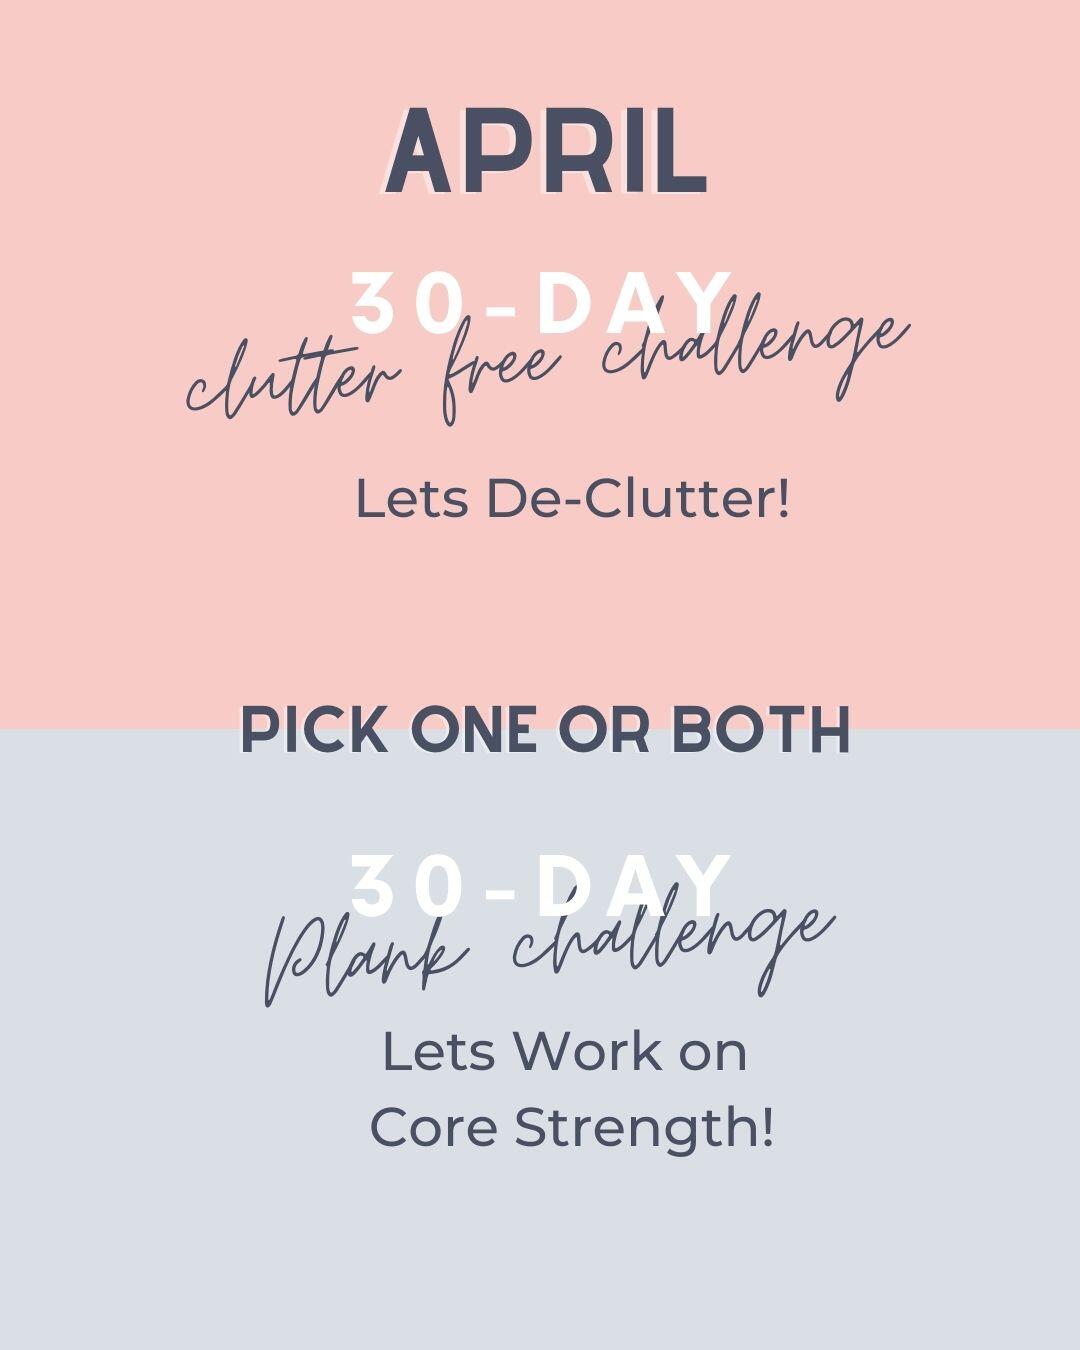 We are doing not one, but two challenges. A de-clutter your space and a plank for strengthening your core. Do one or both with us!